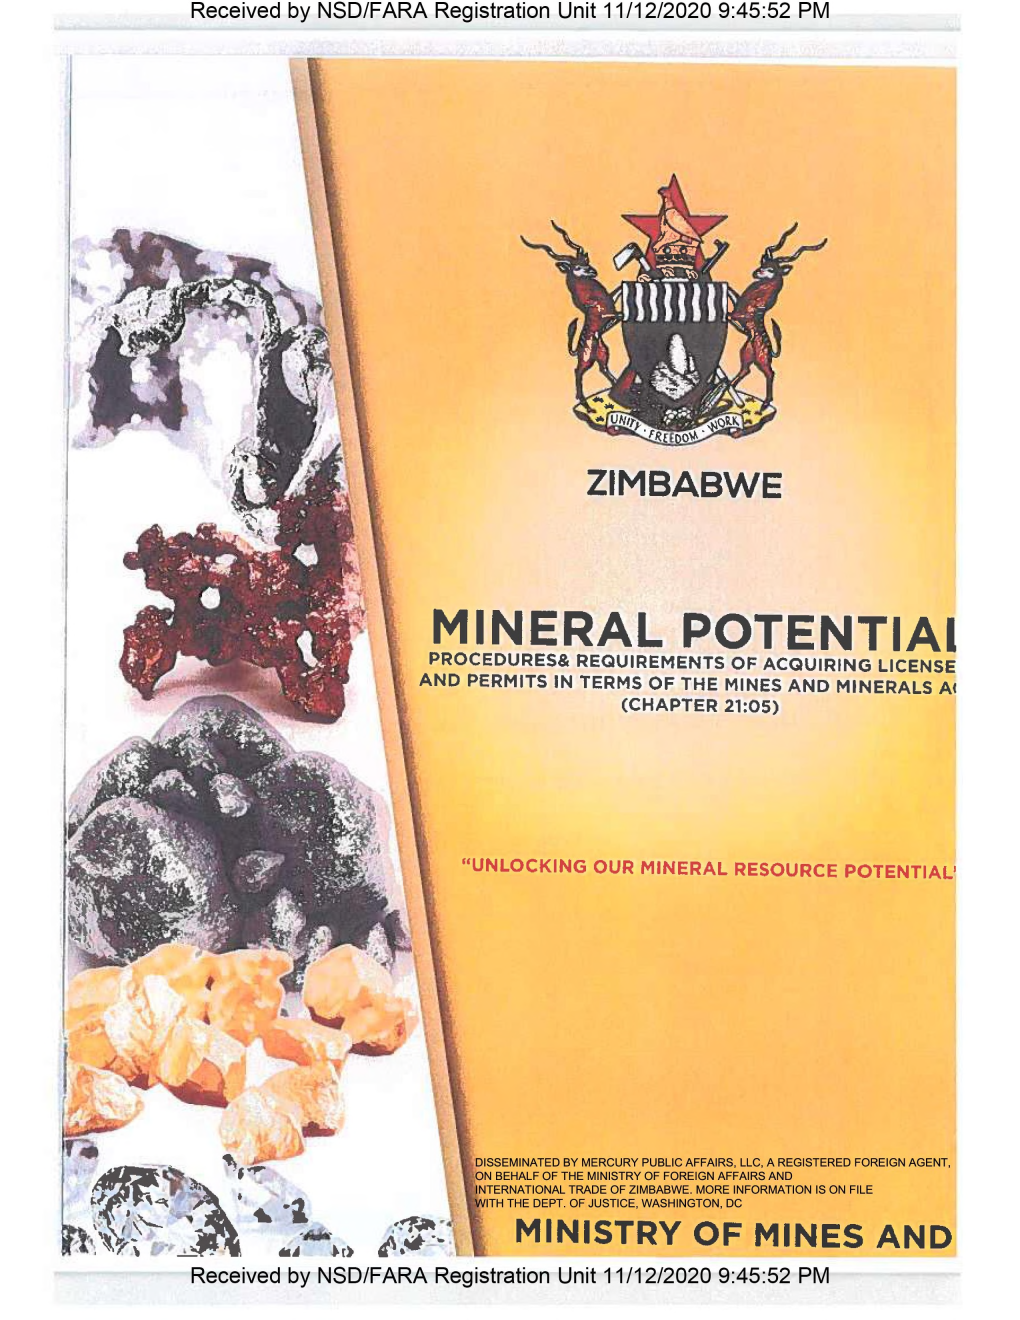 MINERAL Potential